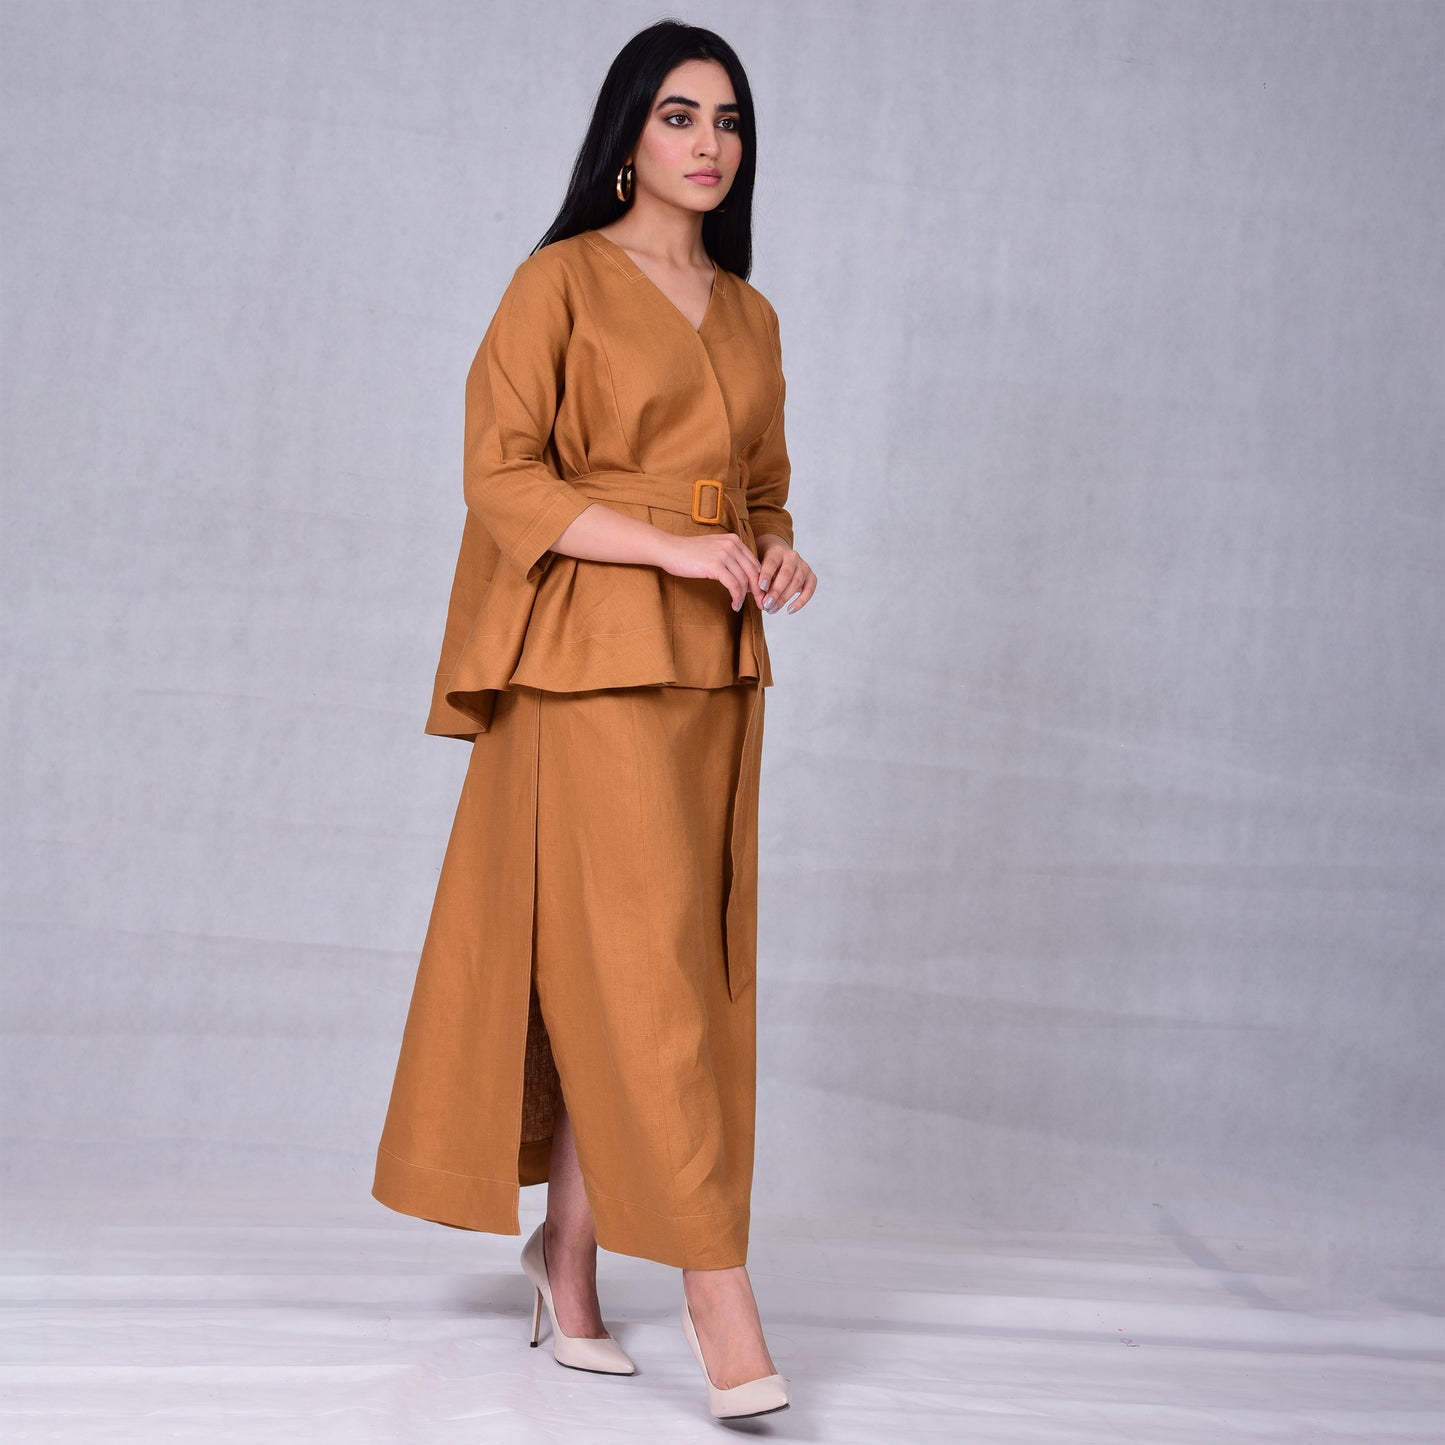 Linen top and skirt set with belt detail - Anmar Couture